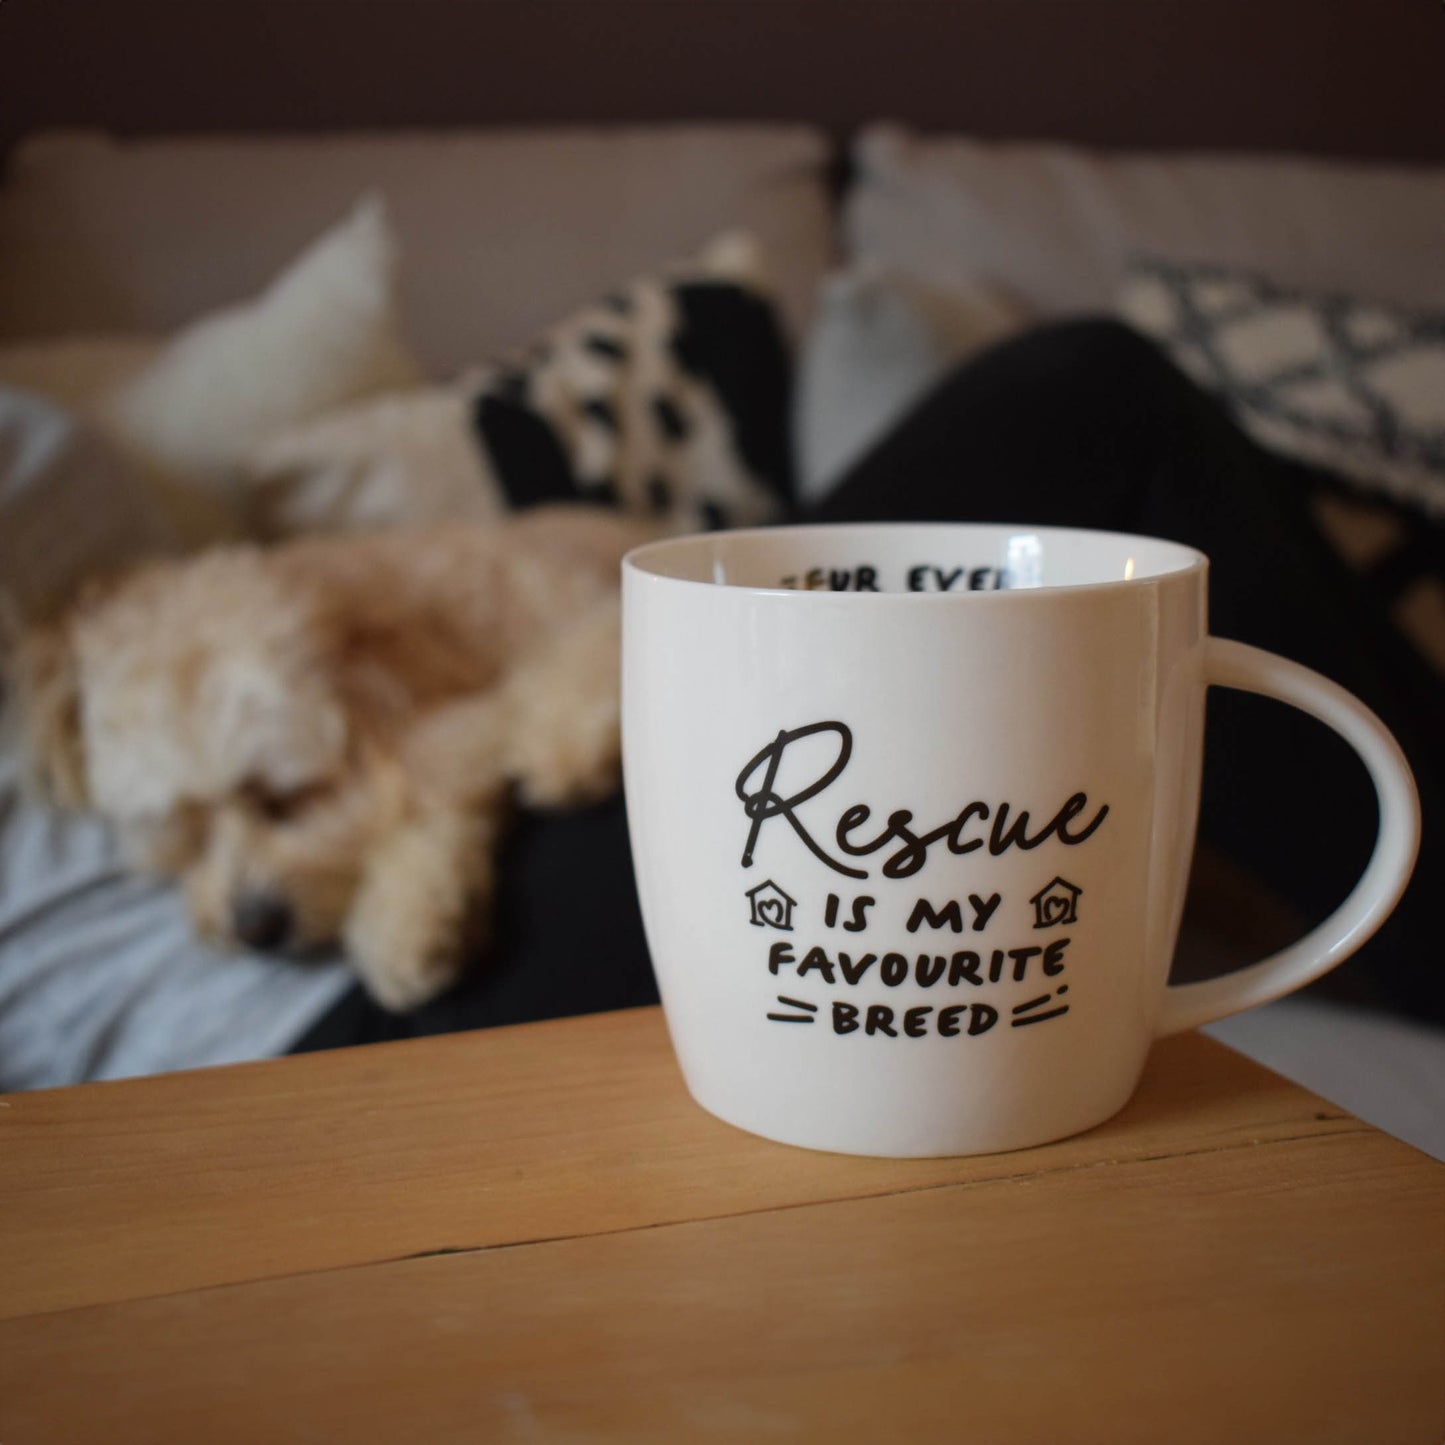 'Rescue is my Favourite Breed' Mug